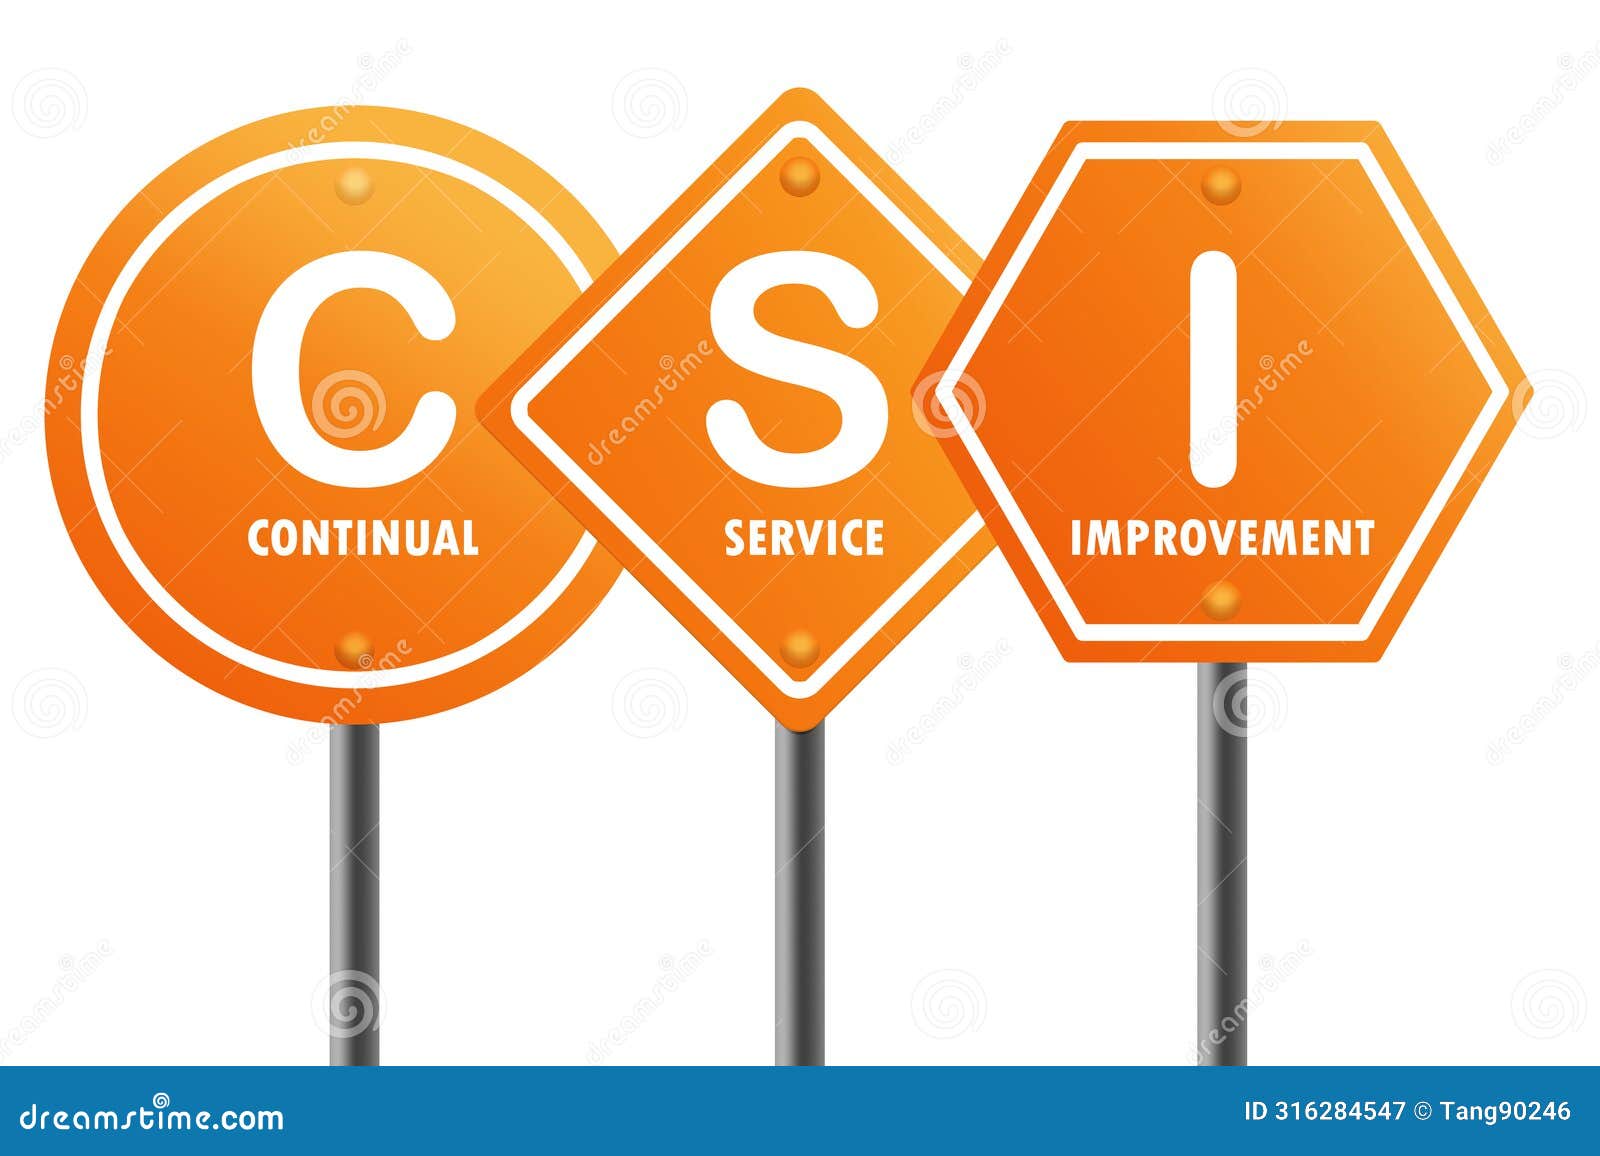 road sign with csi continual service improvement word